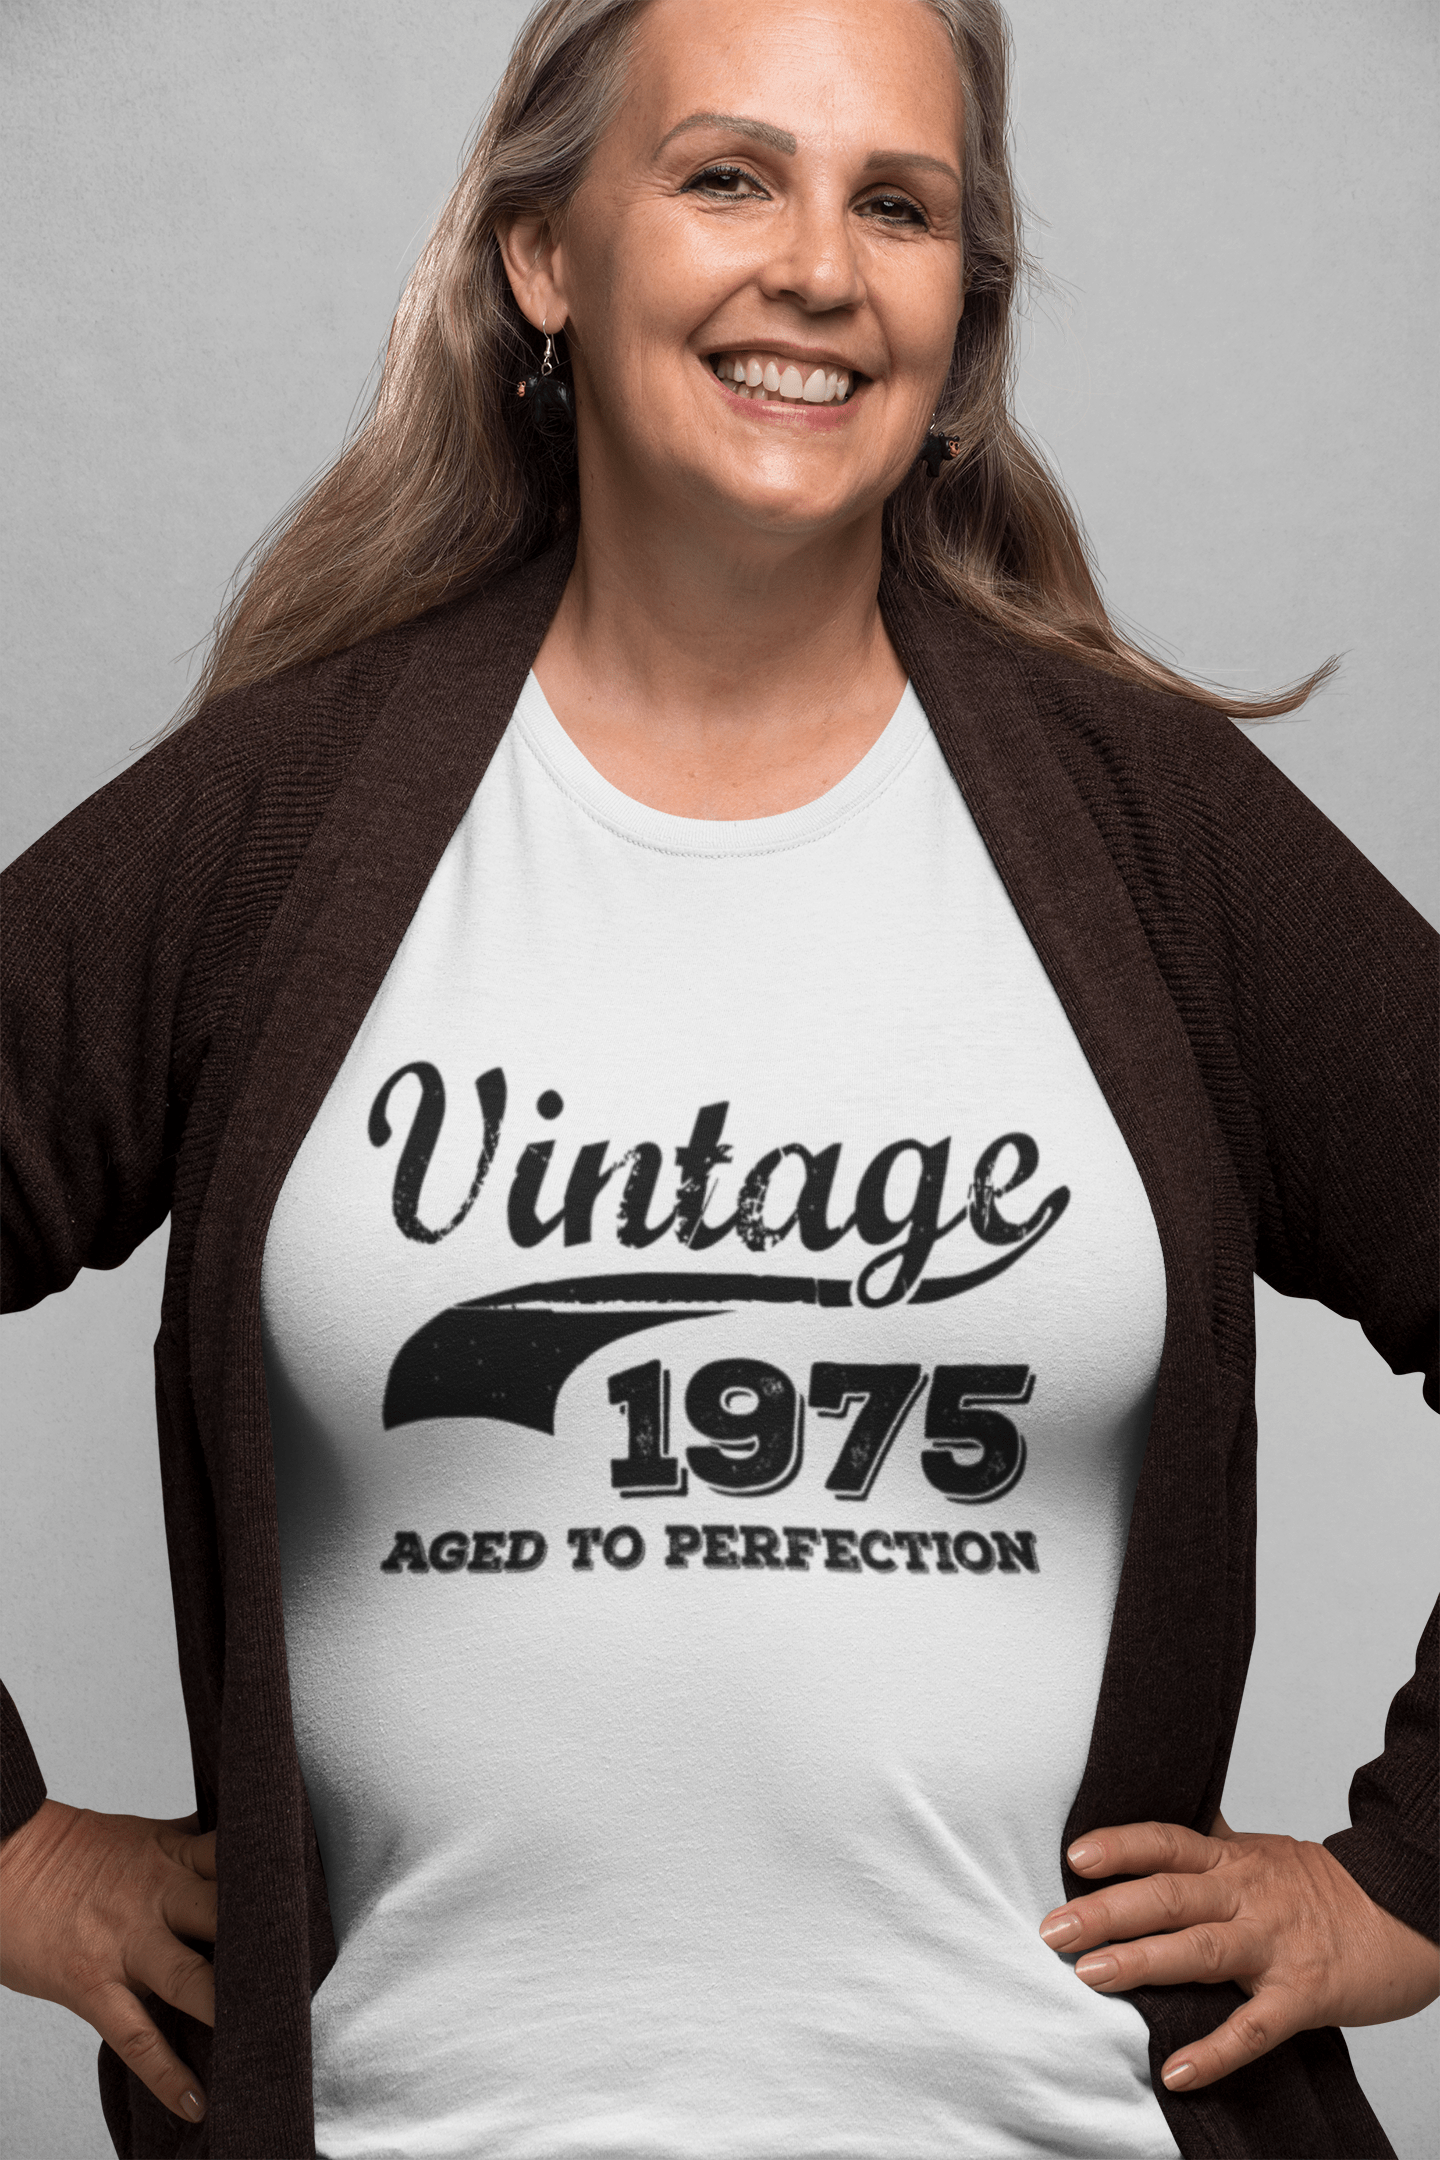 Vintage Aged To Perfection 1975, White, Women's Short Sleeve Round Neck T-shirt, gift t-shirt 00344